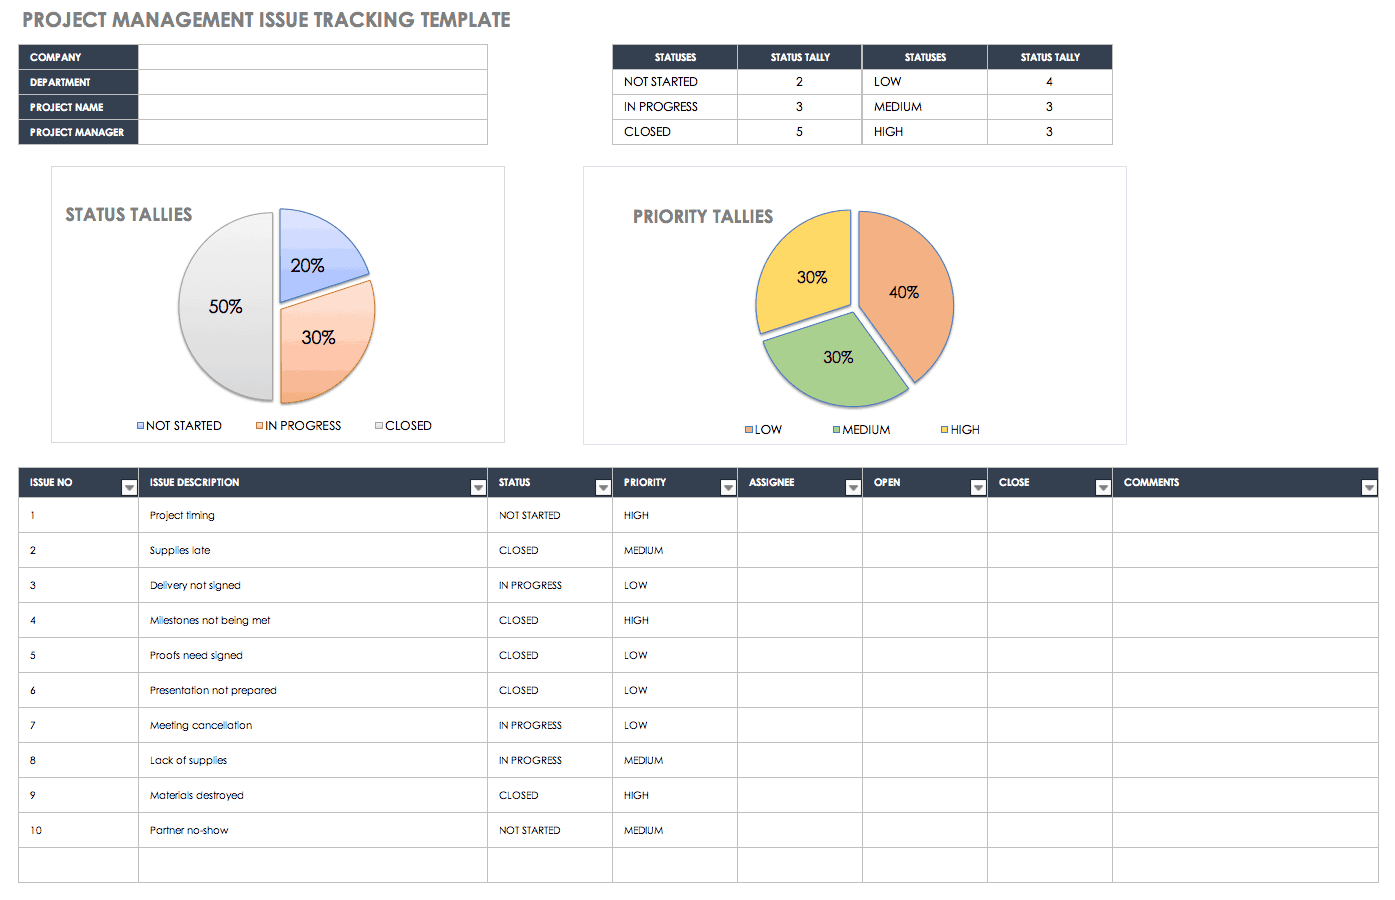 Project Management Issue Tracking Template